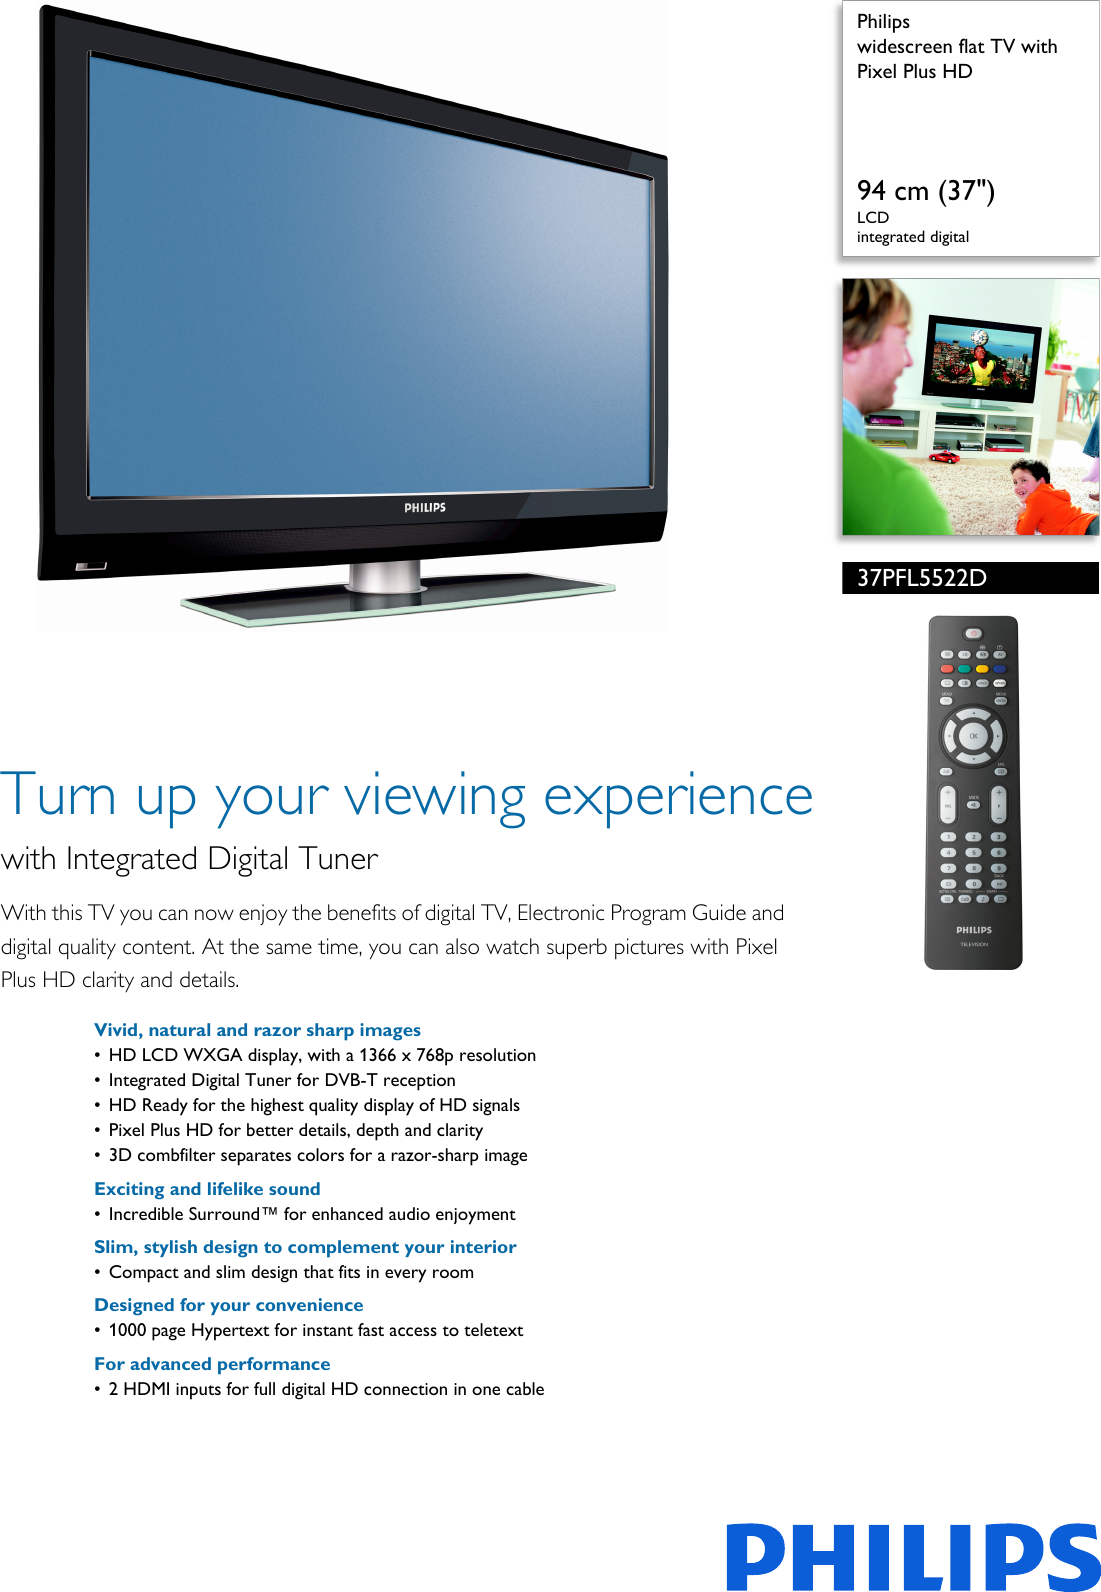 Page 1 of 3 - Philips 37PFL5522D/12 Widescreen Flat TV With Pixel Plus HD User Manual Esite 37pfl5522d 12 Pss